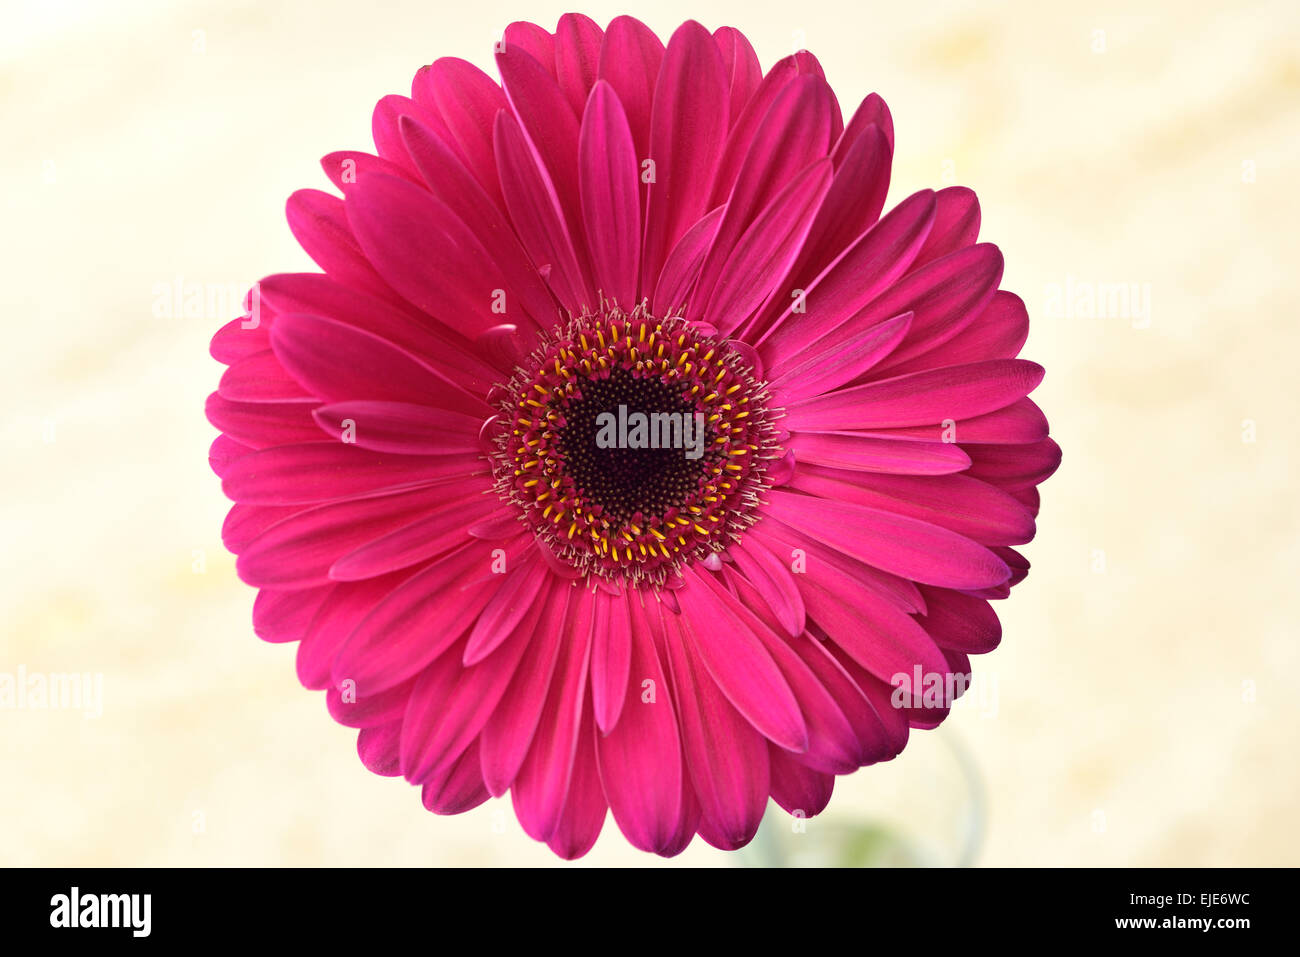 Pink Gerbera daisy flower head with a bright background Stock Photo